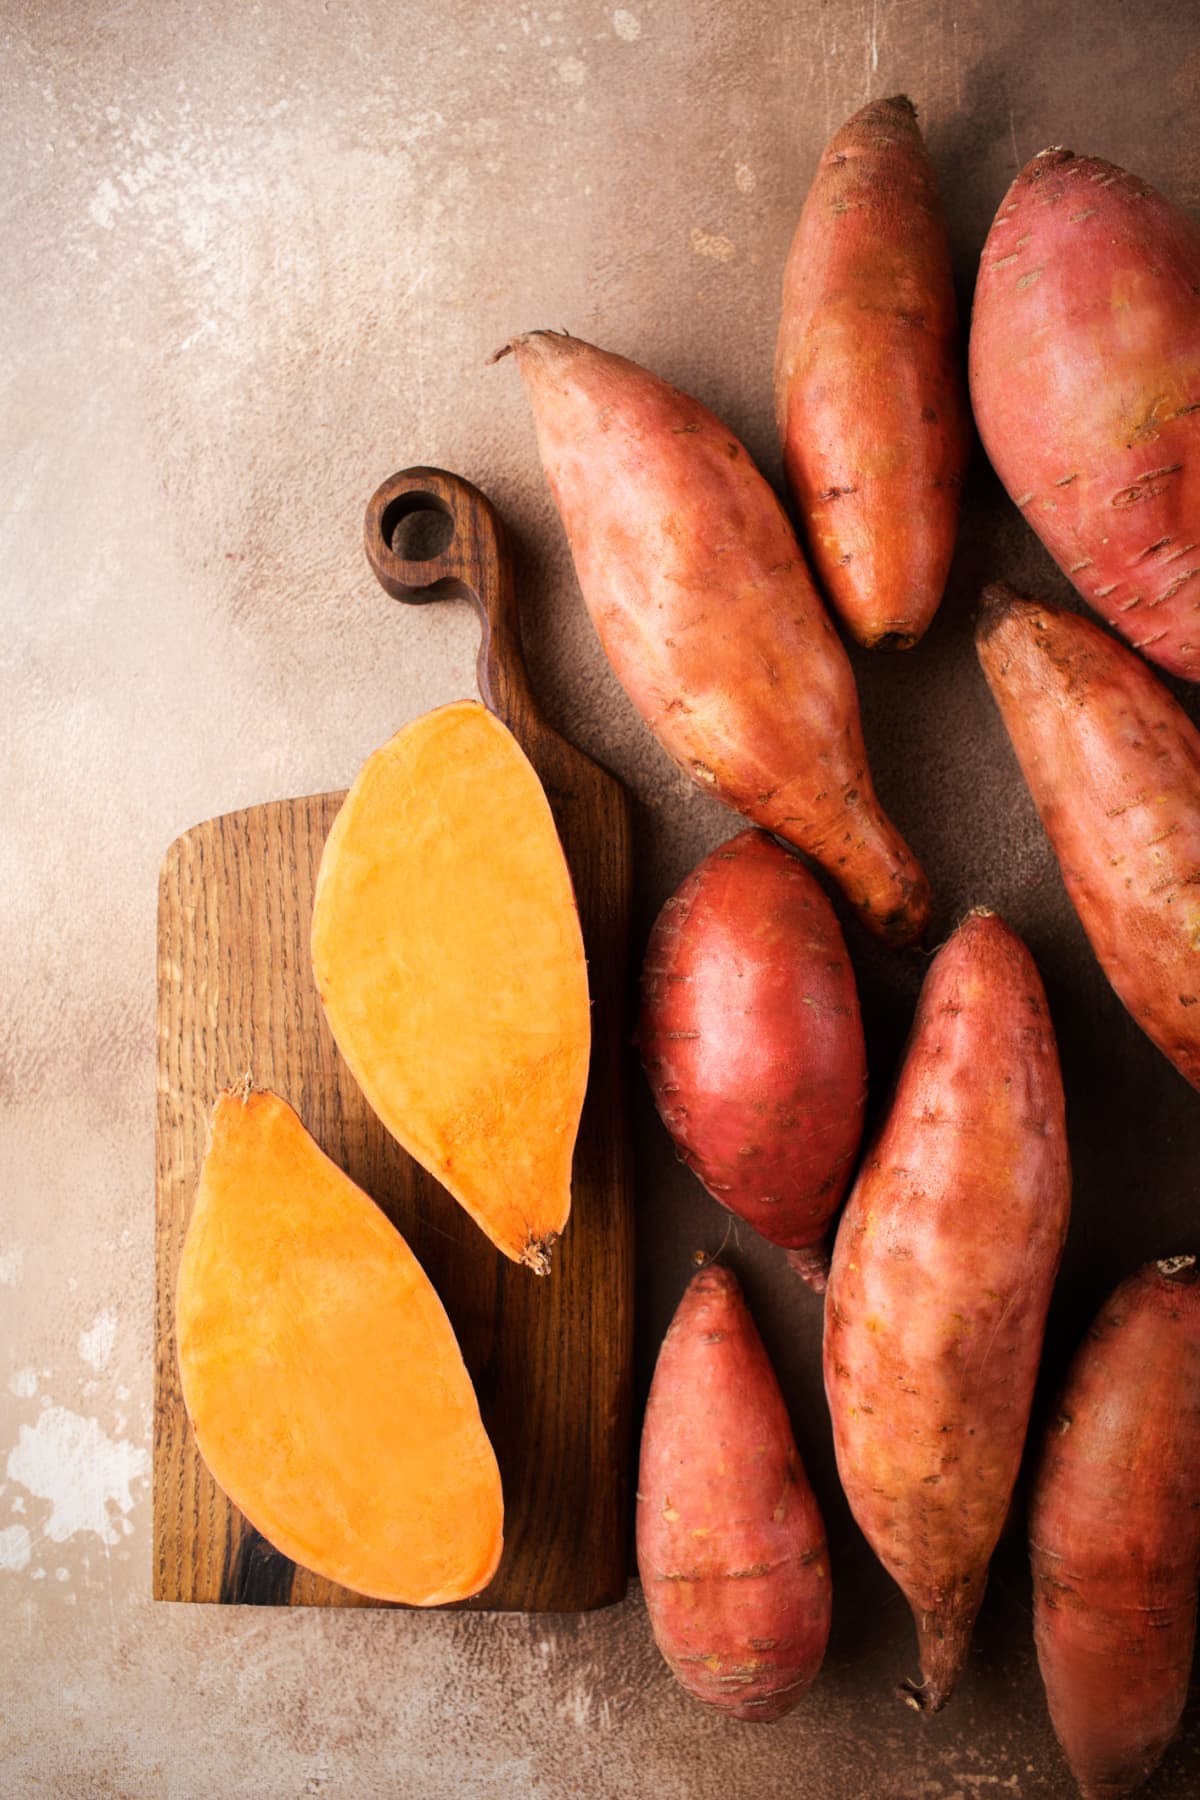 Several sweet potatoes on brown counter and cutting board